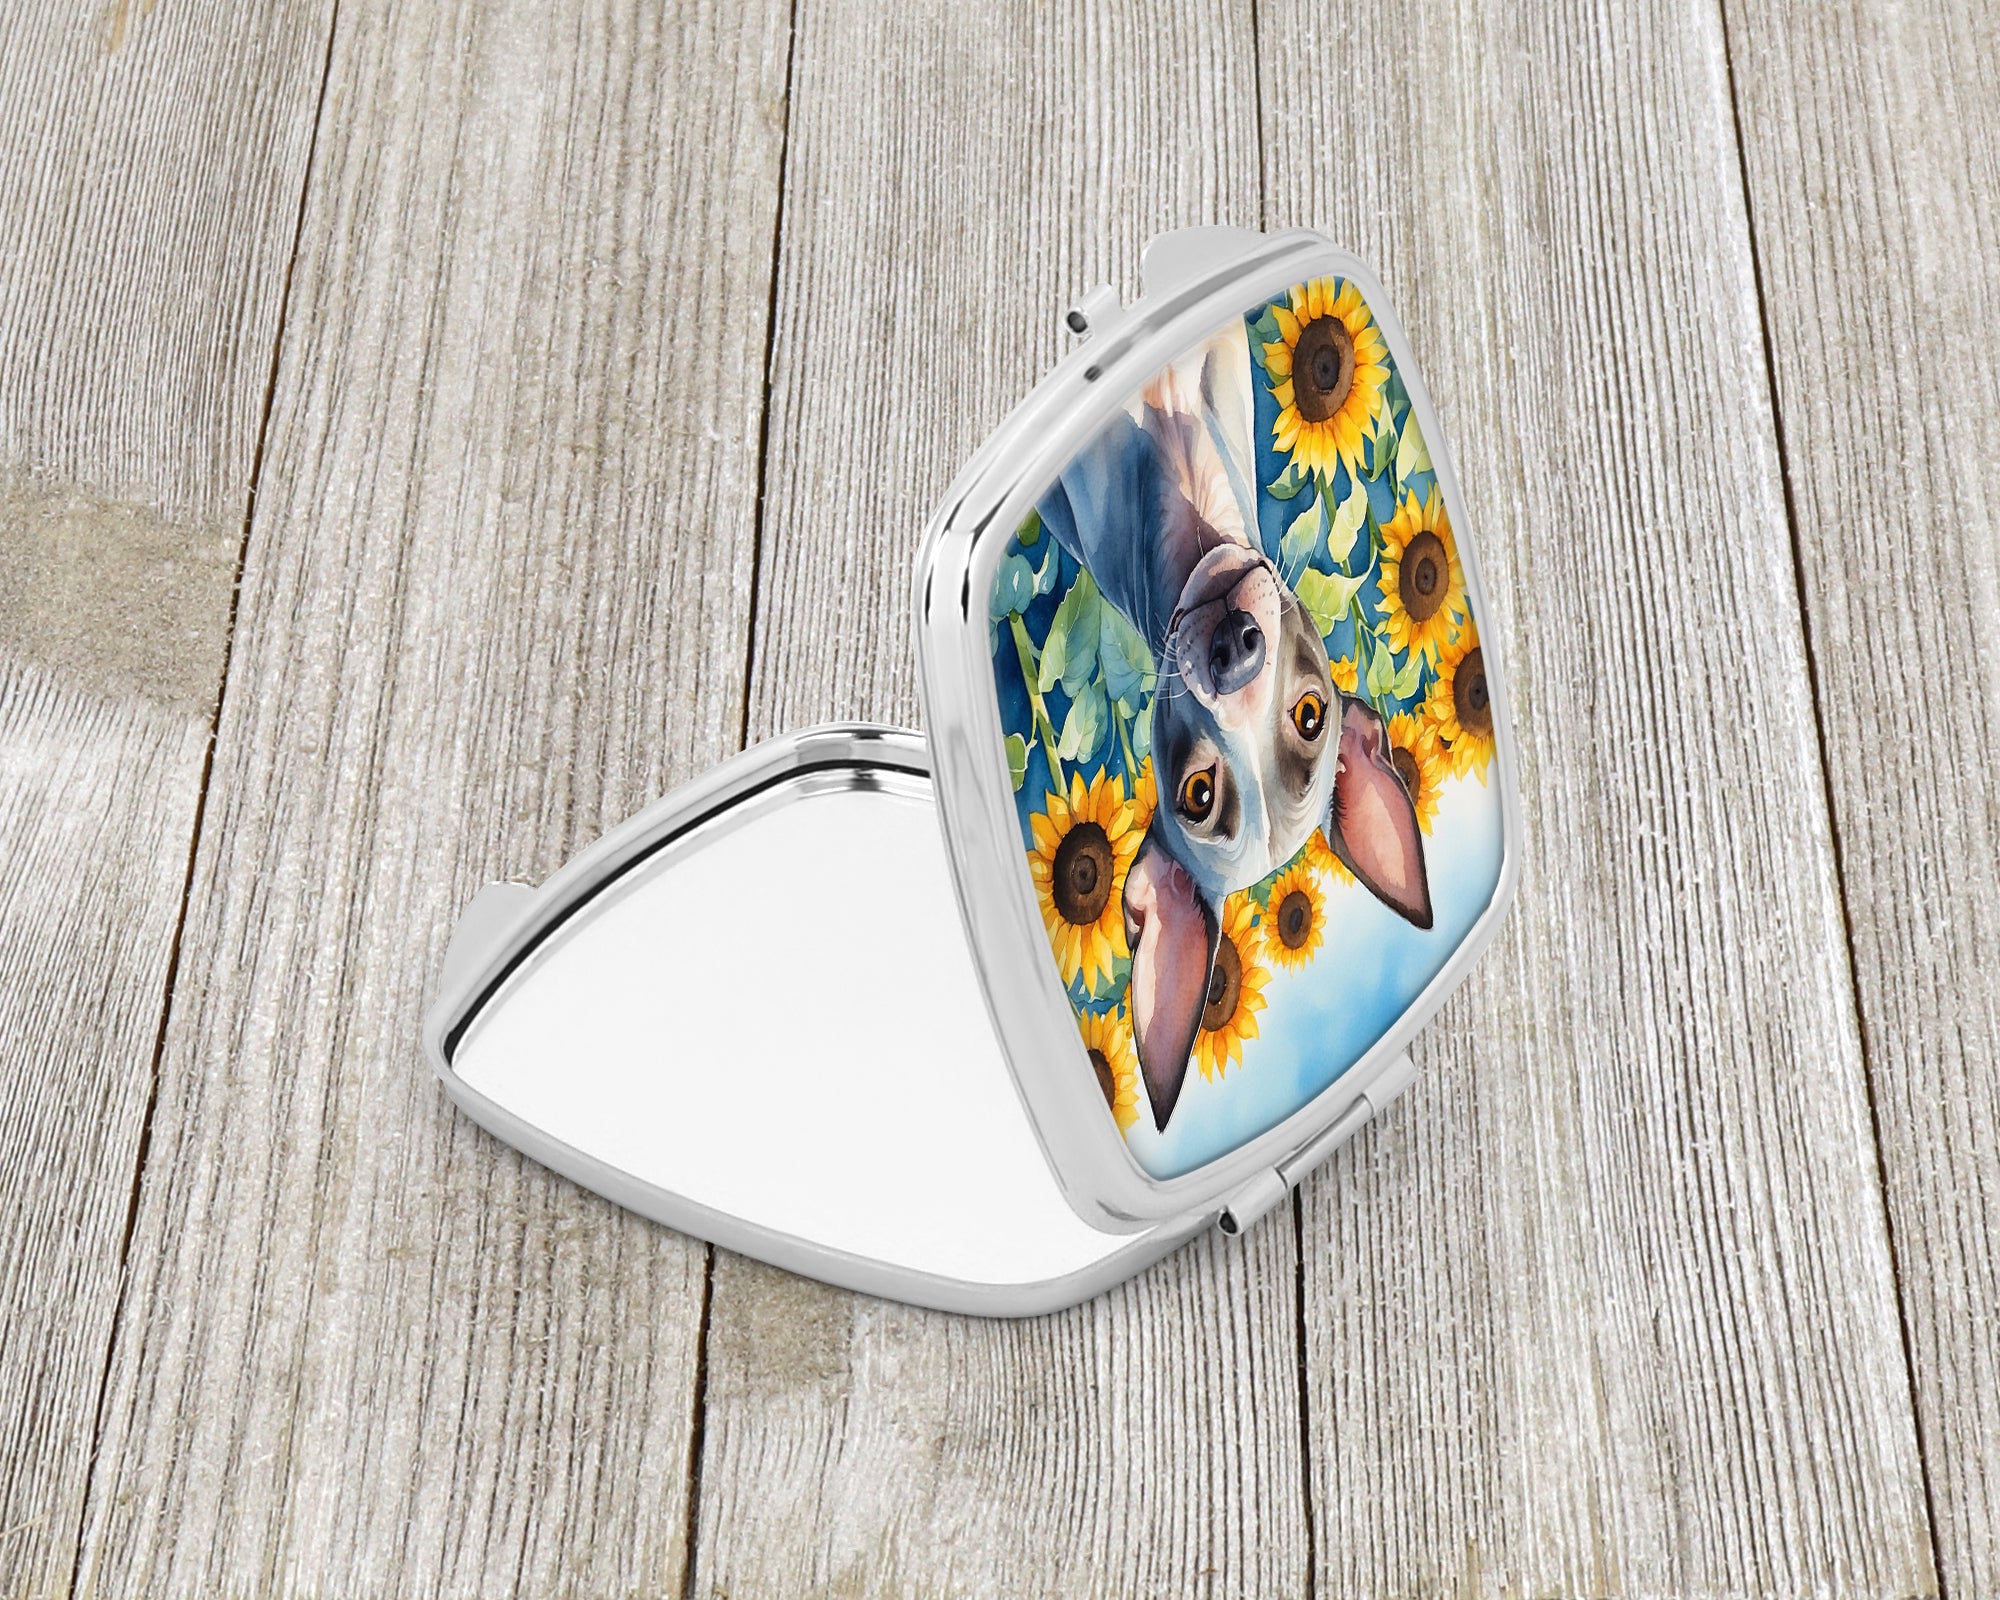 Buy this American Hairless Terrier in Sunflowers Compact Mirror